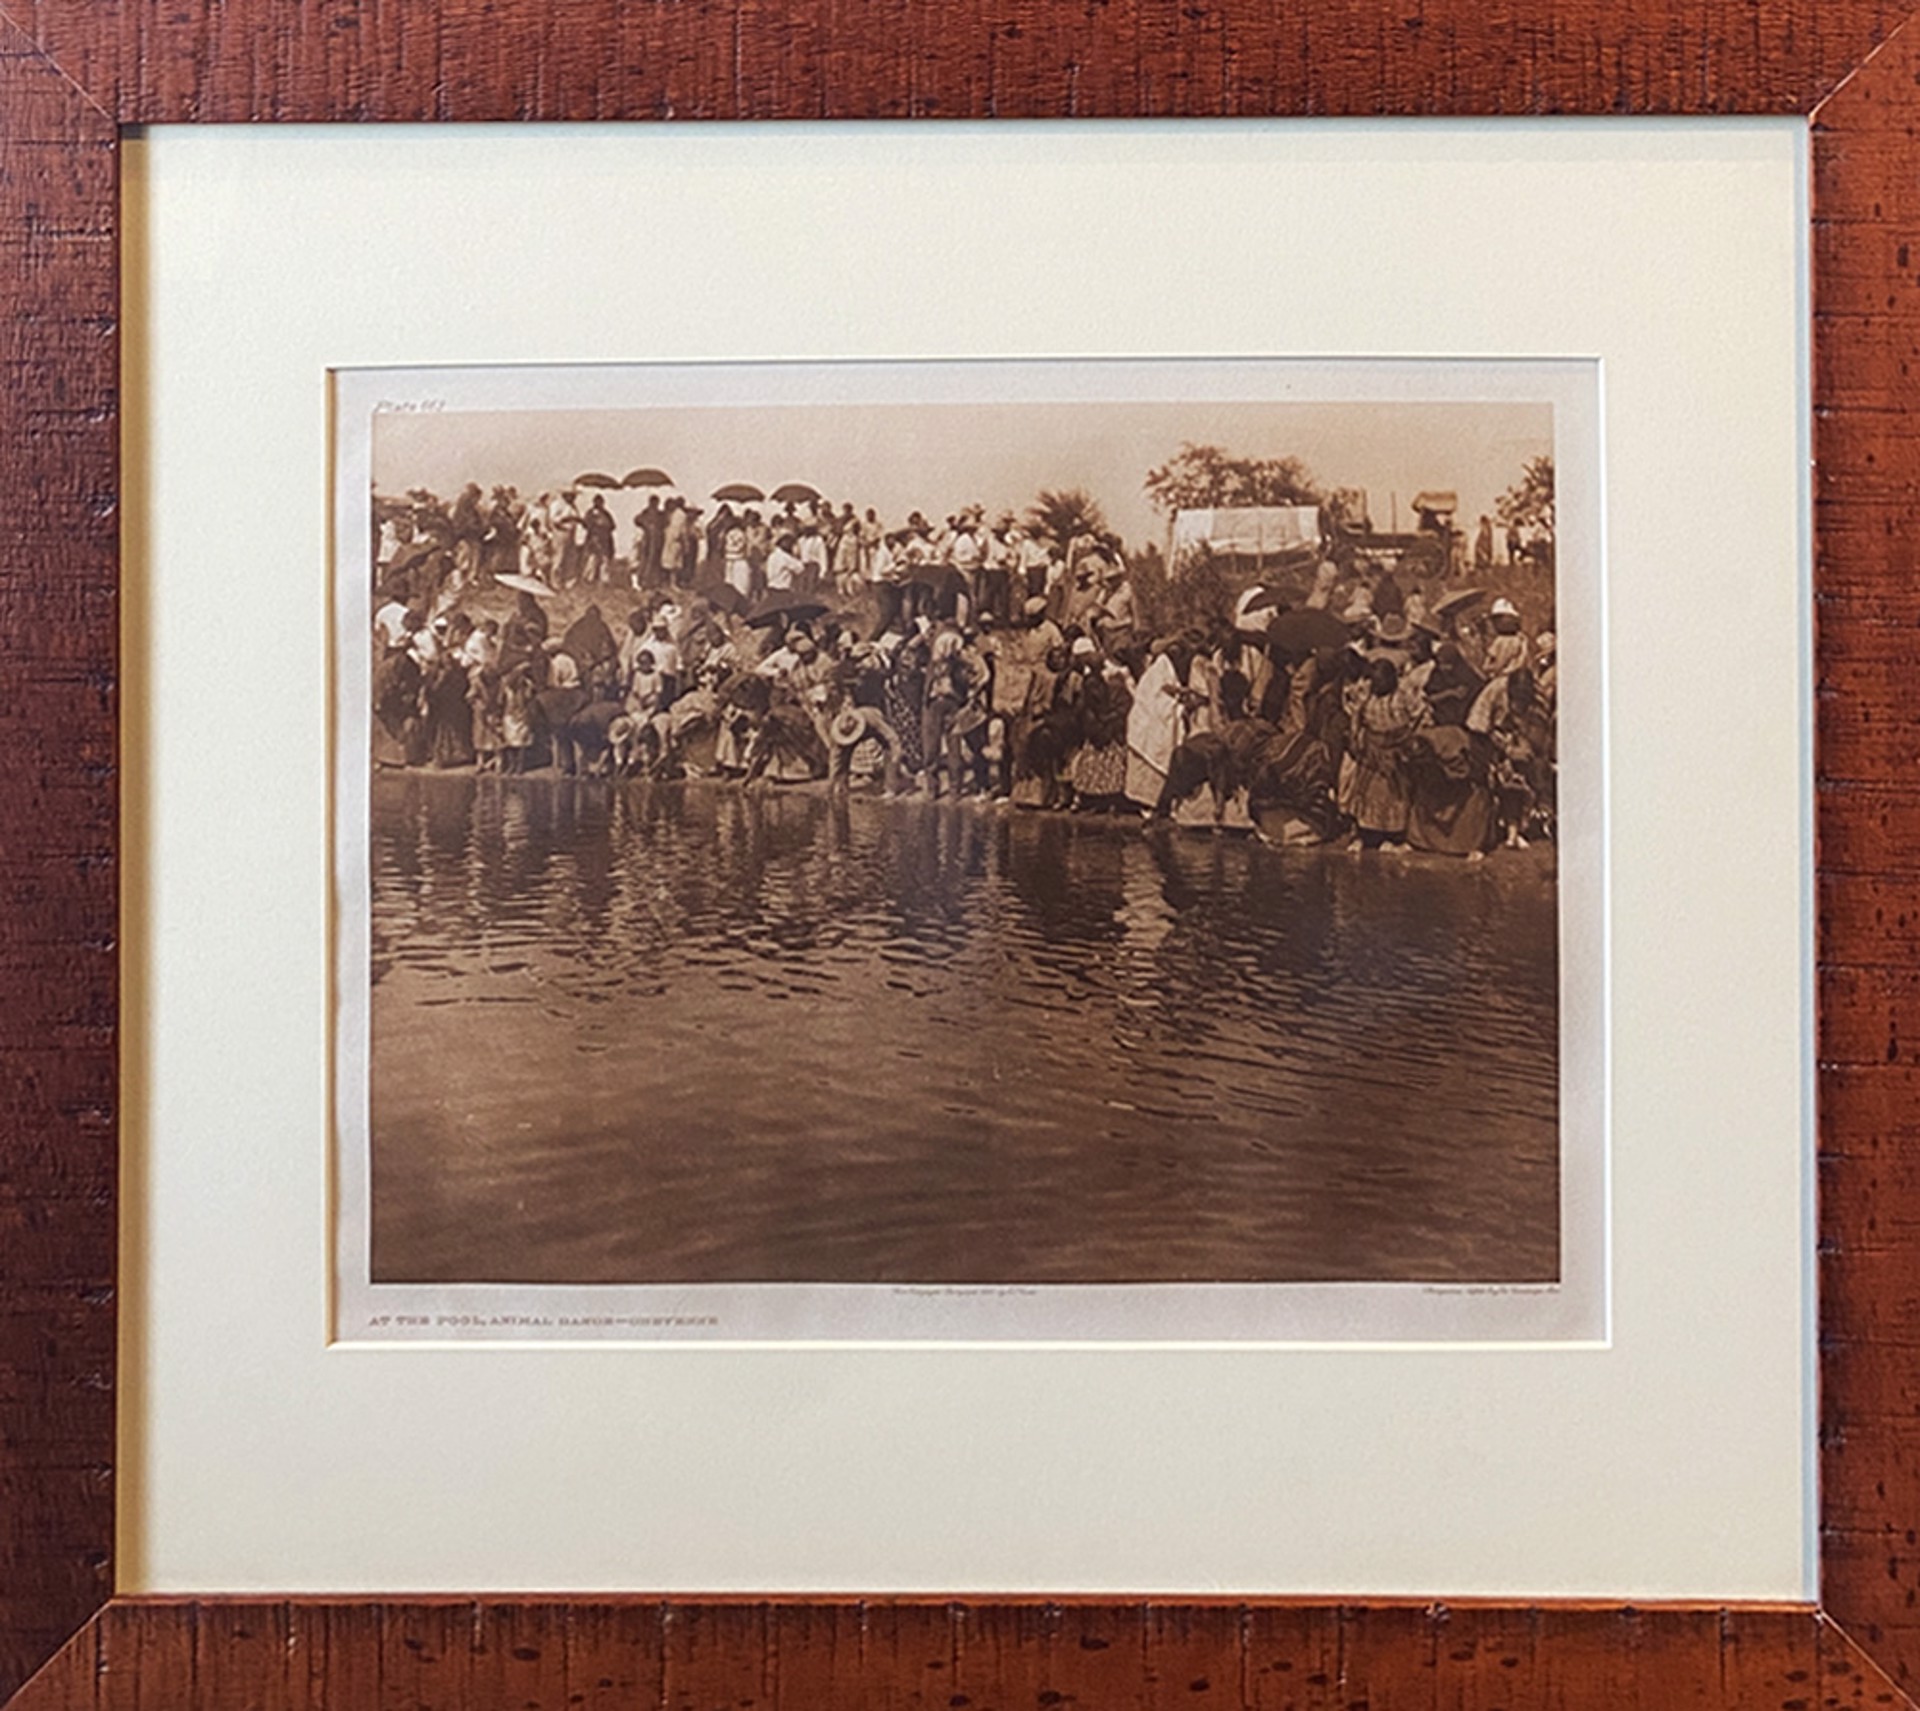 At the Pool, Animal Dance - Cheyenne, plate #663 by Edward S Curtis